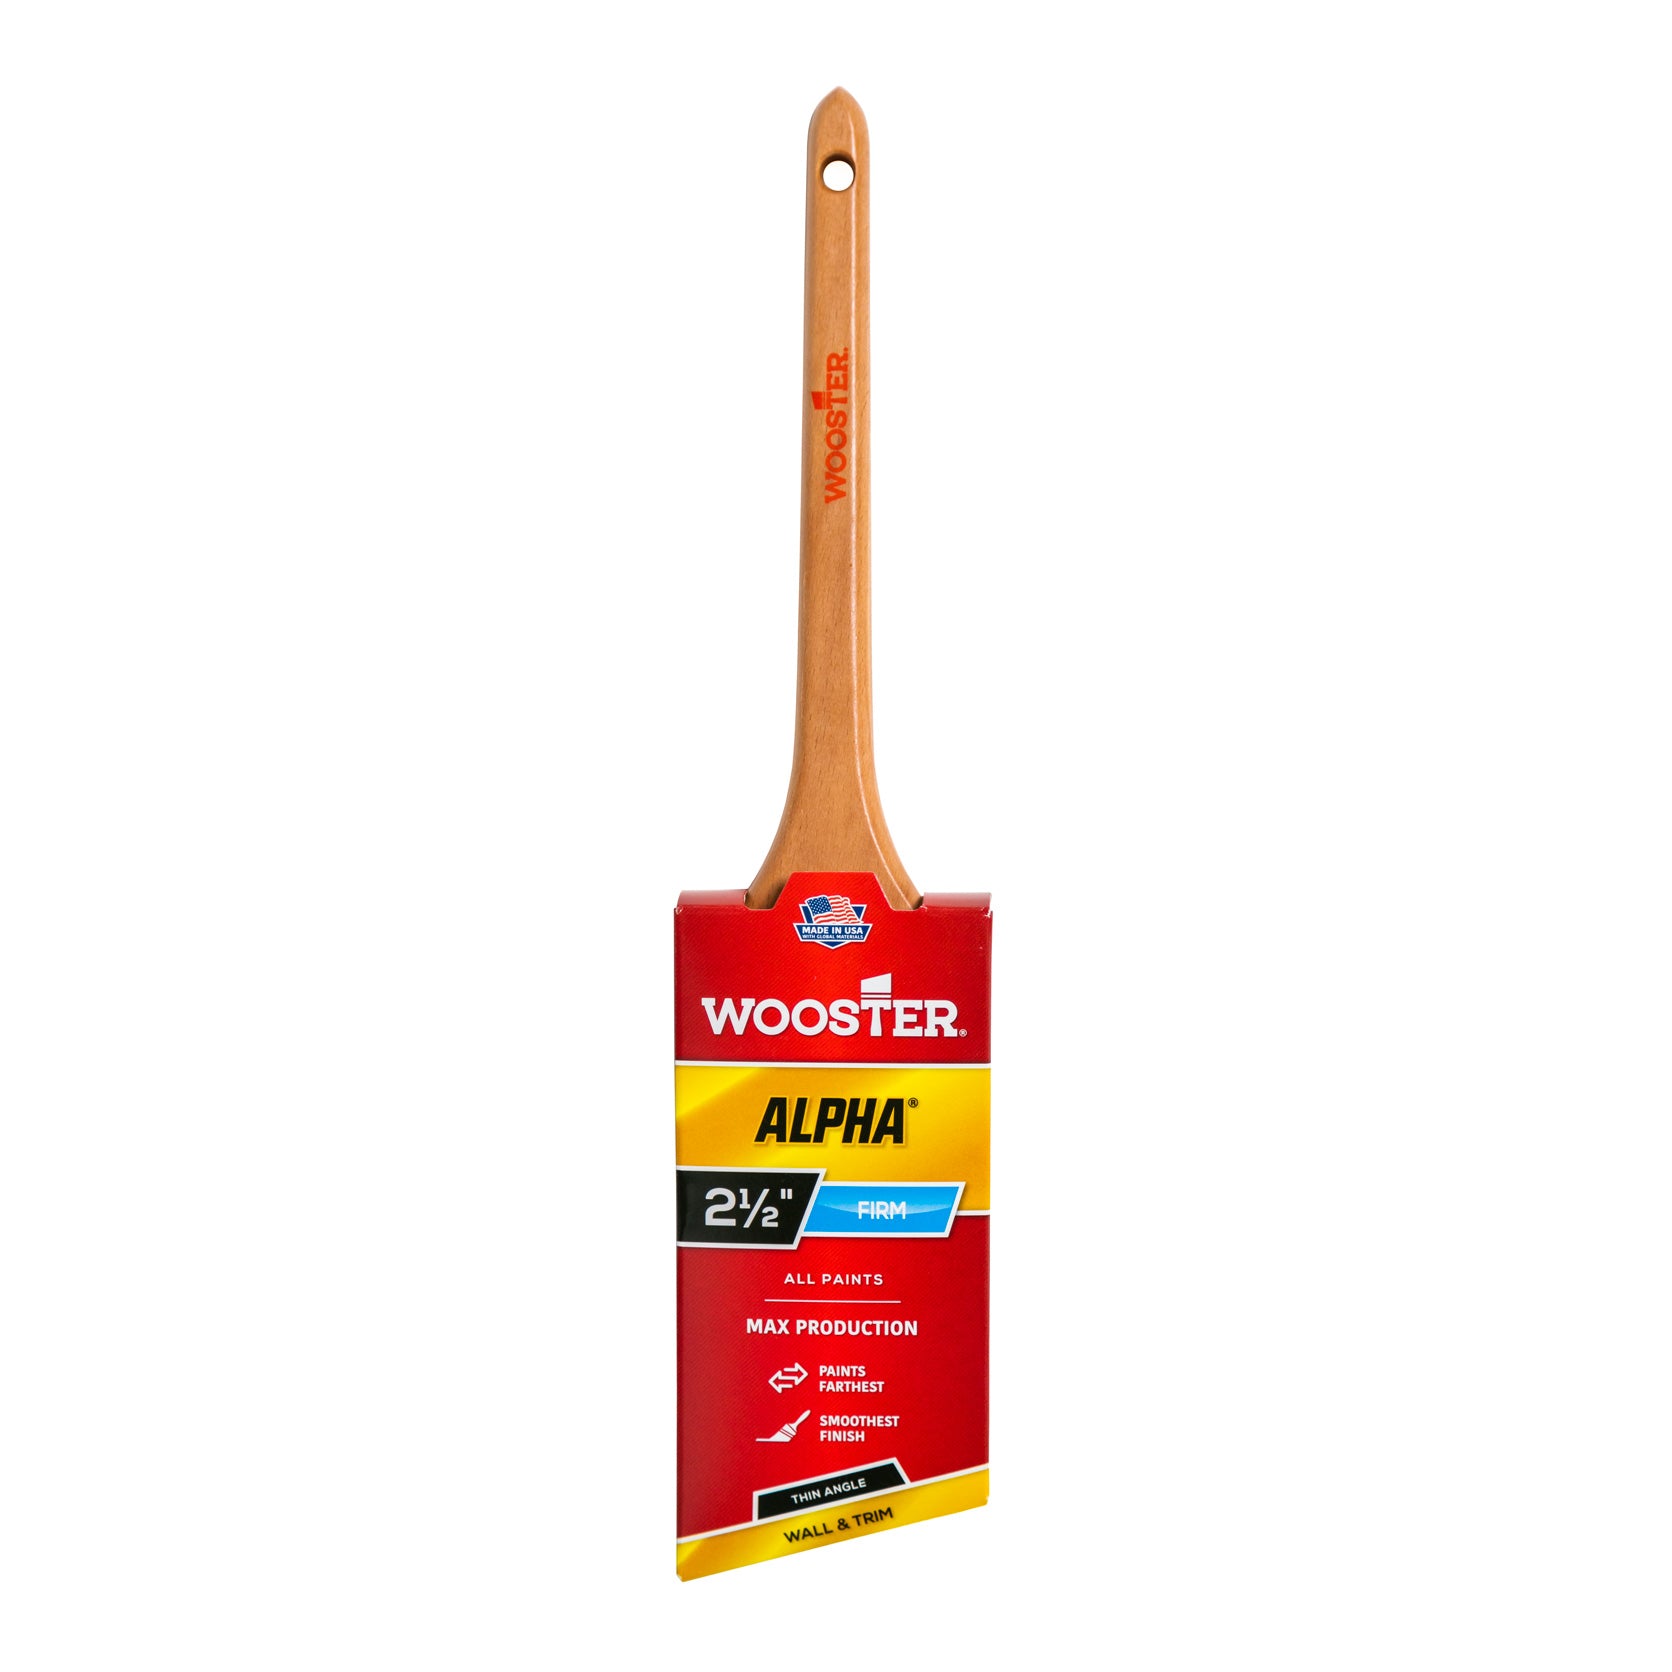 Wooster Alpha Paint Brush